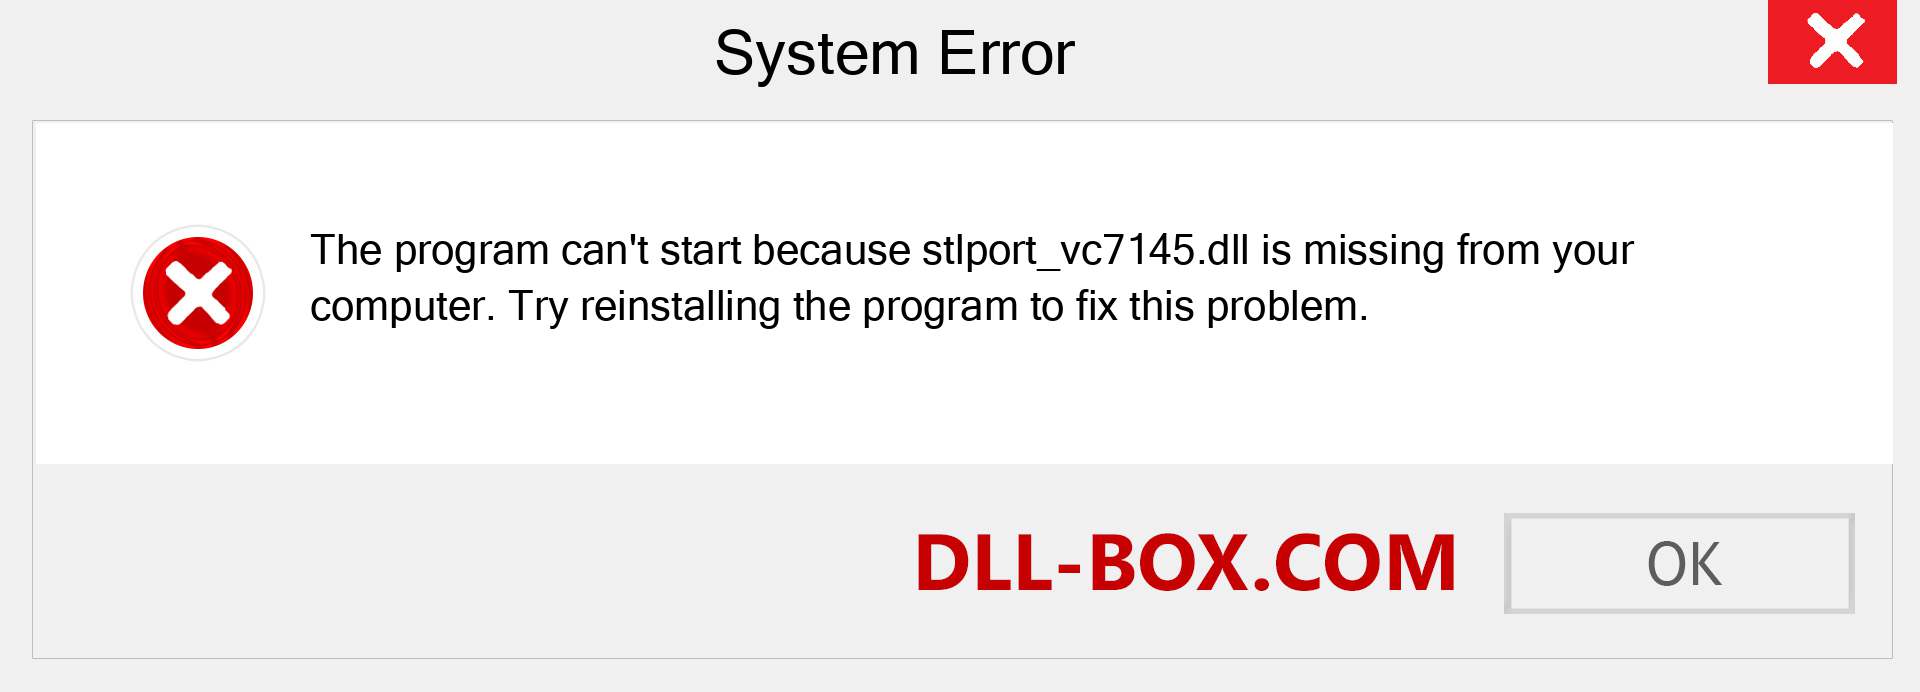  stlport_vc7145.dll file is missing?. Download for Windows 7, 8, 10 - Fix  stlport_vc7145 dll Missing Error on Windows, photos, images